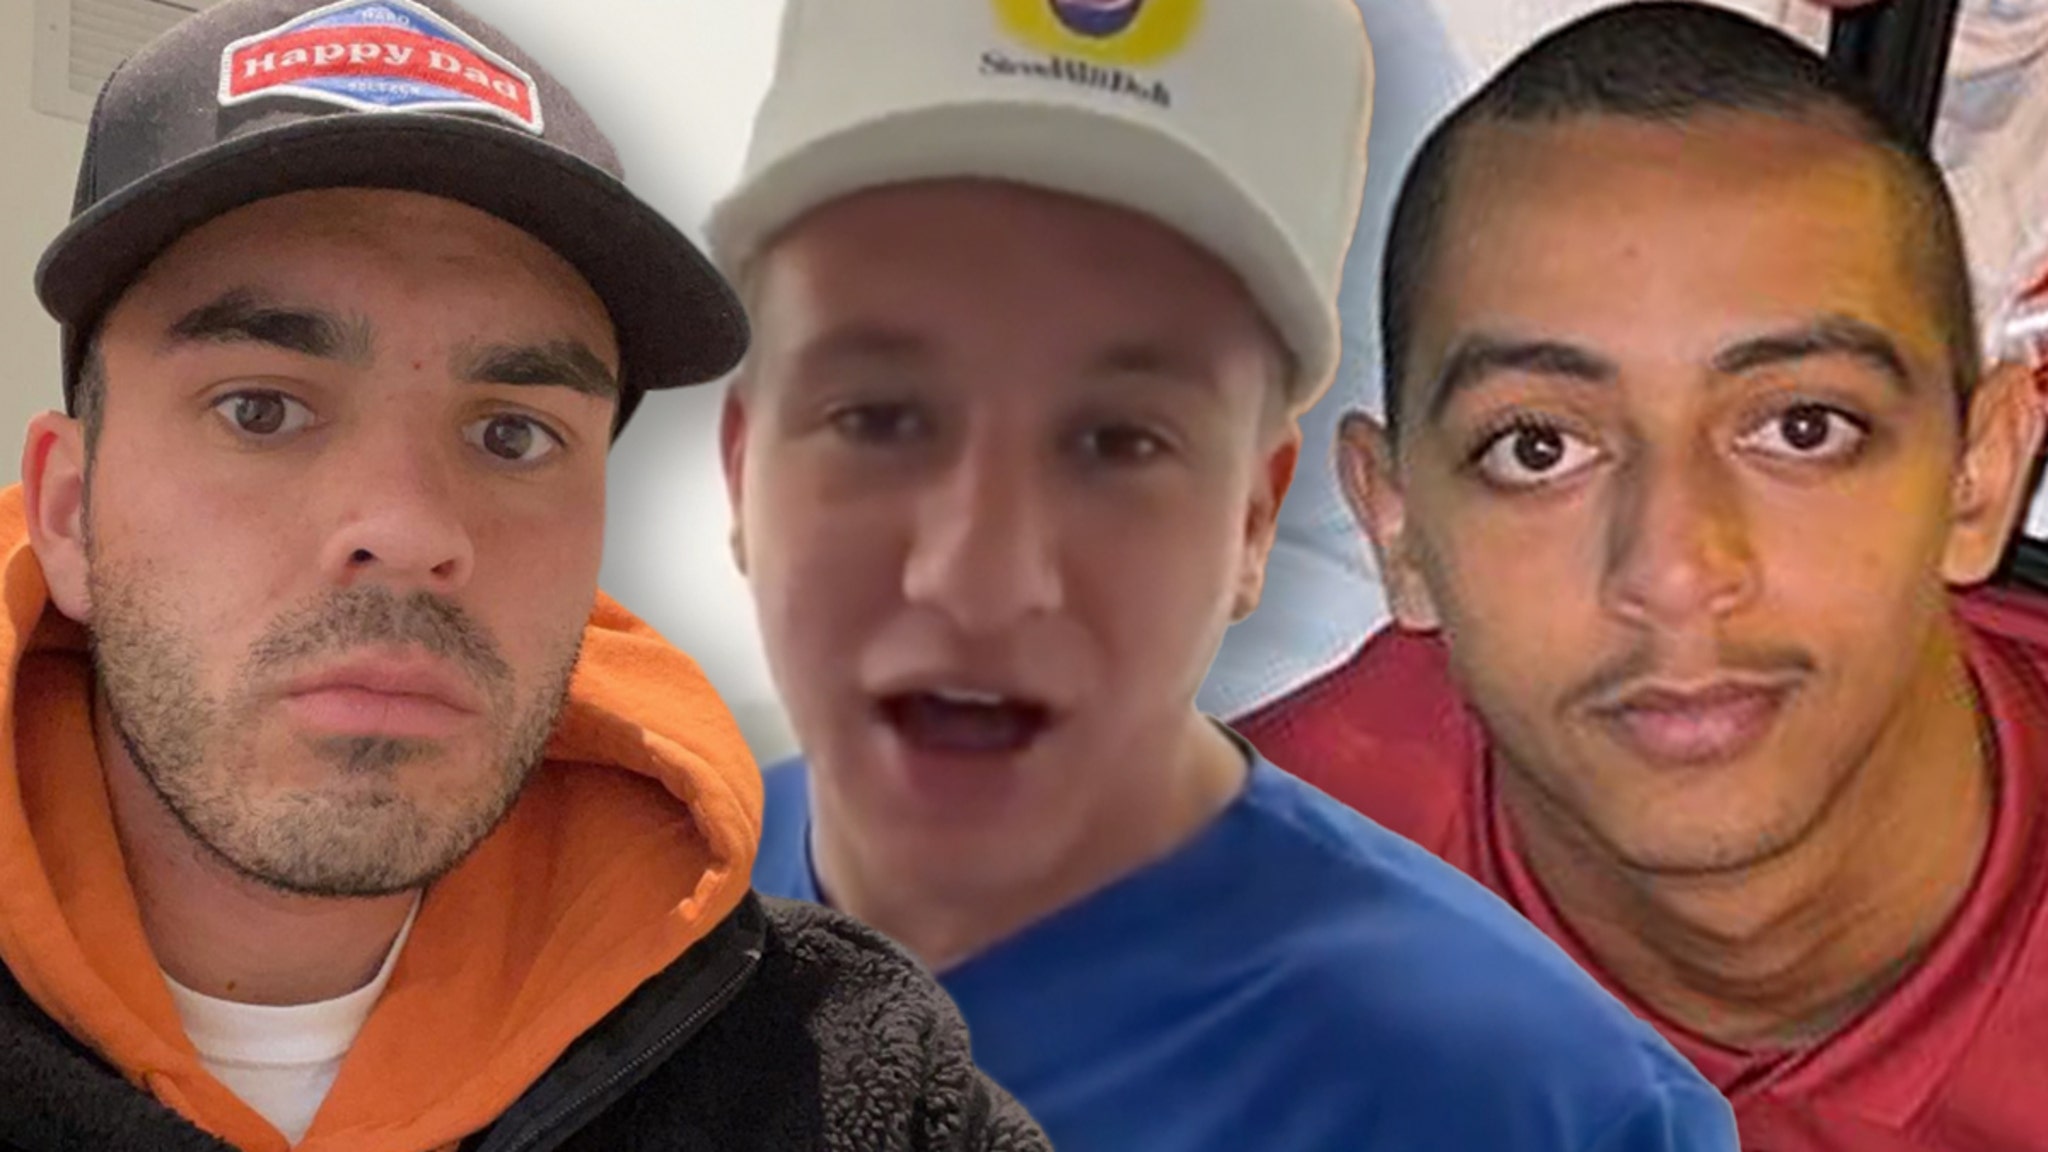 YouTube’s Nelk Boys Sued For Assault and Battery Over Fake Meth Lab Prank